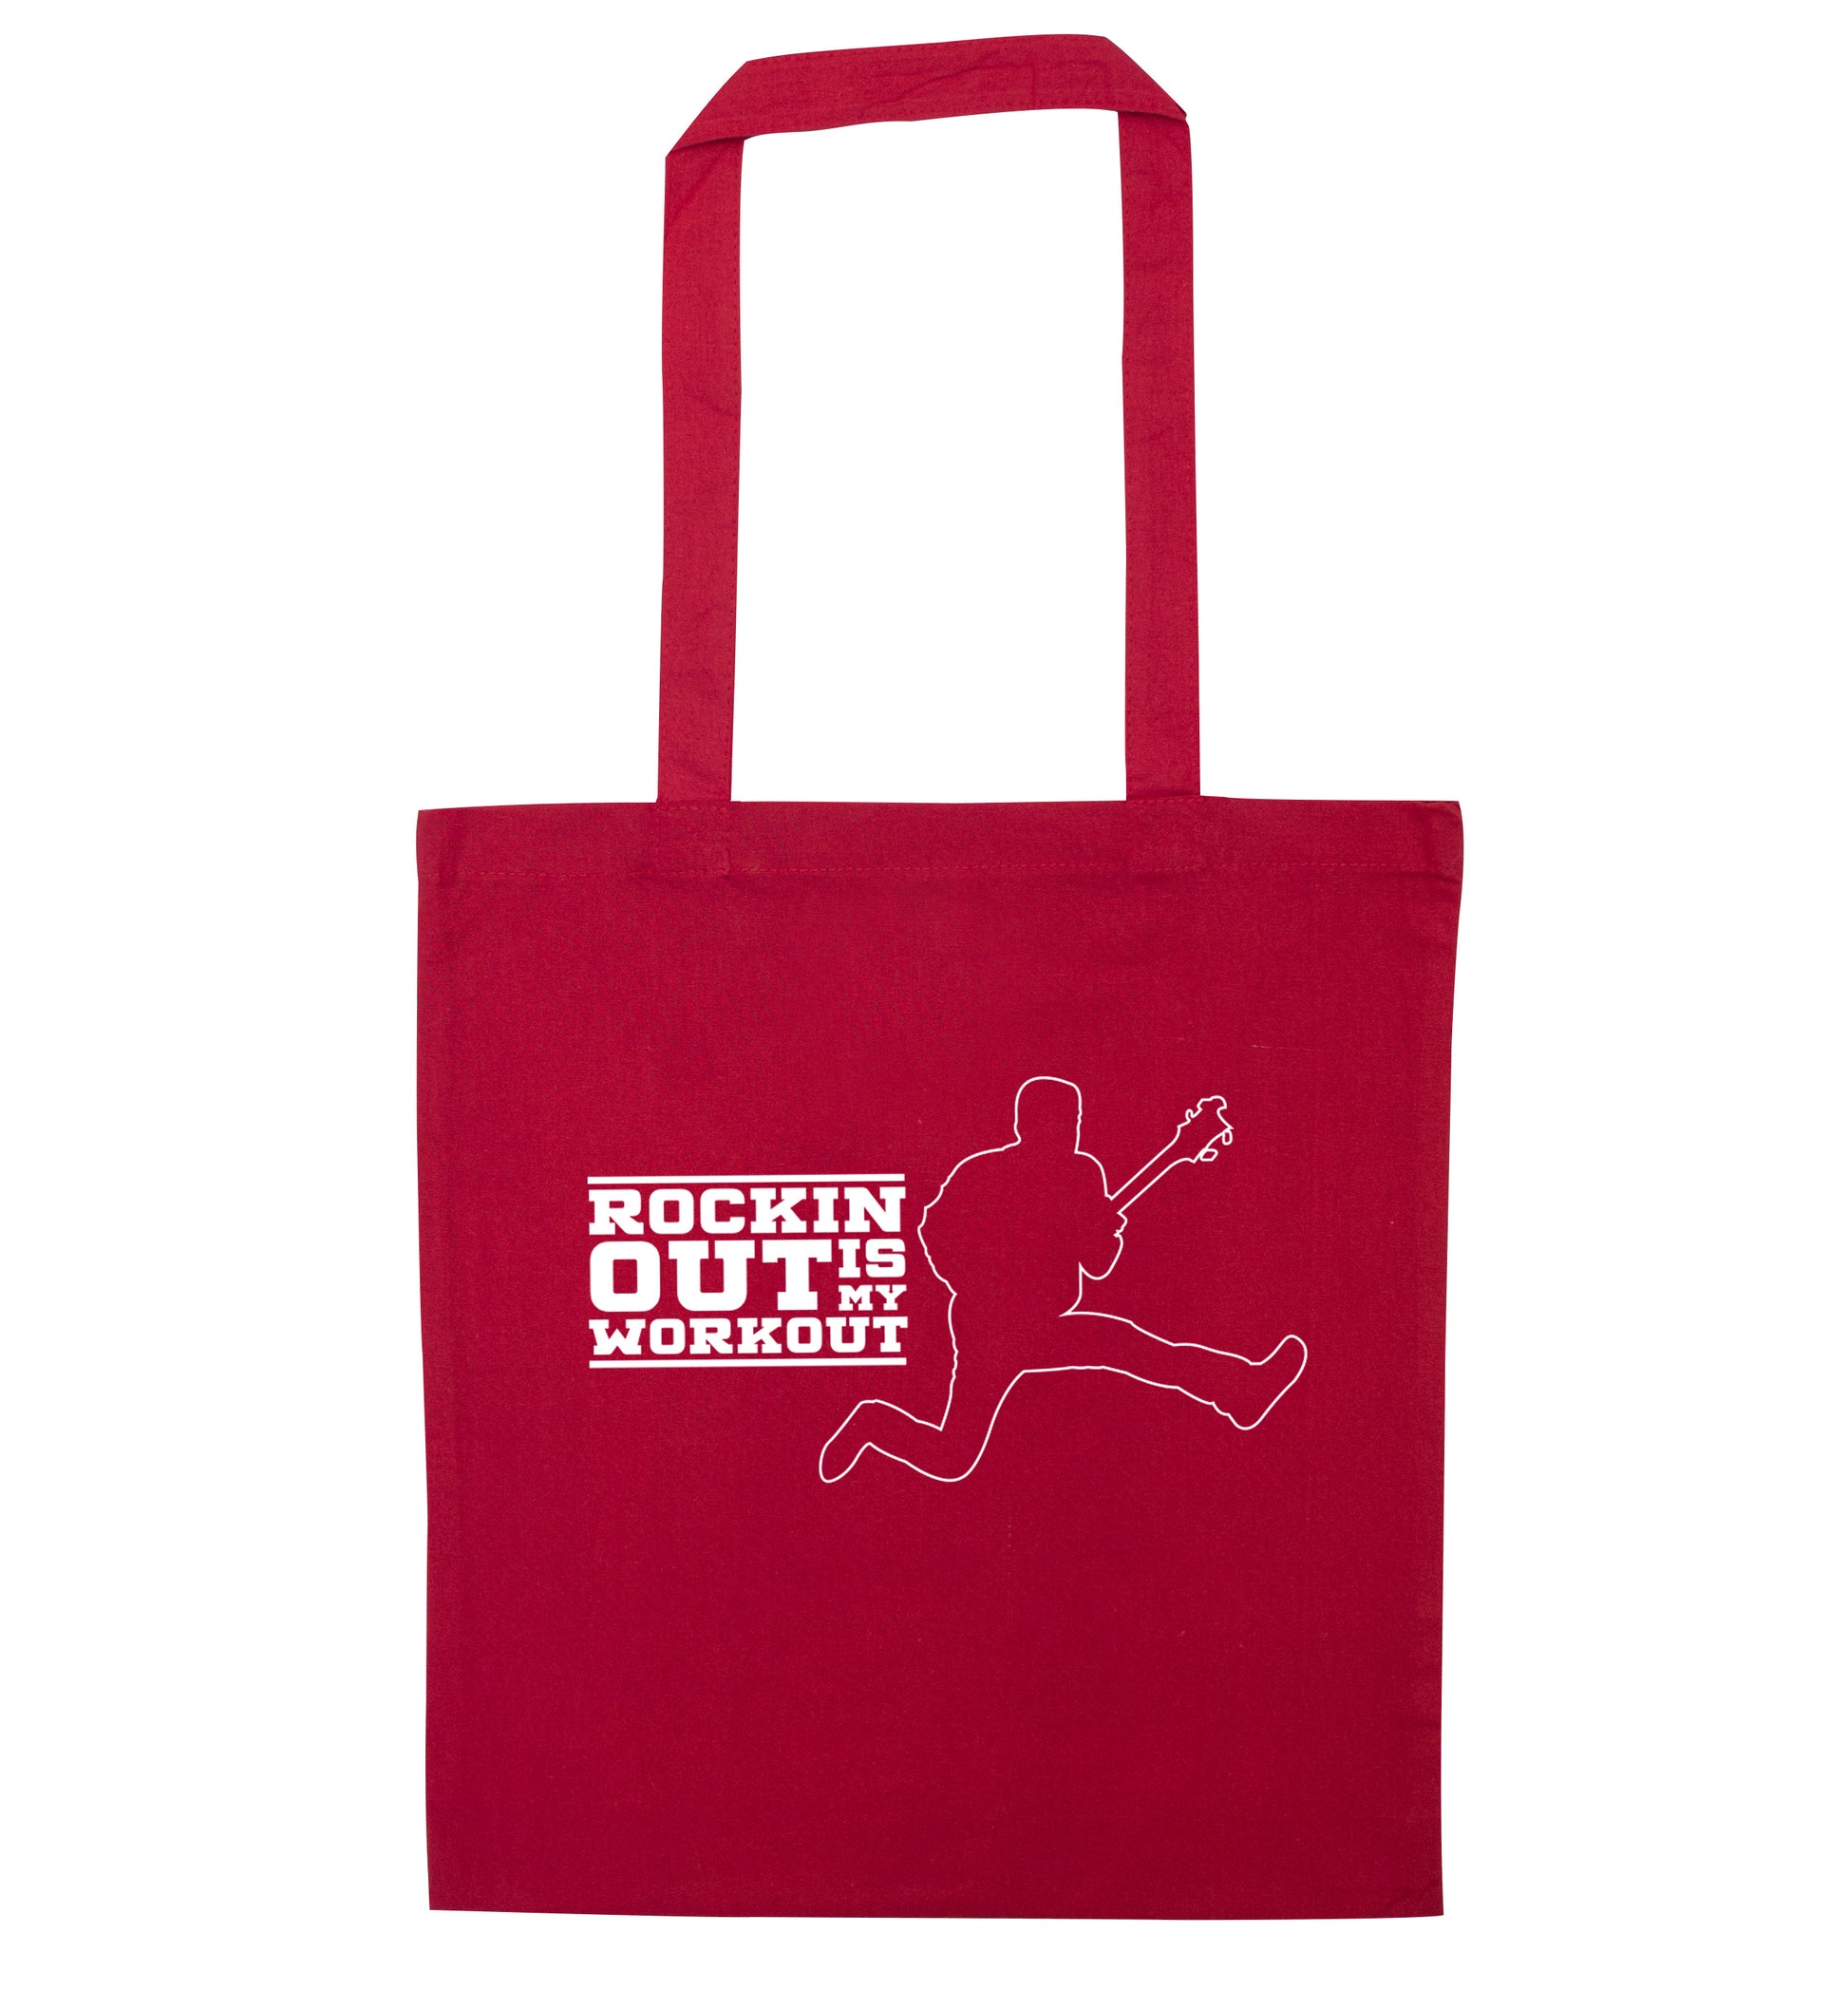 Rockin out is my workout red tote bag